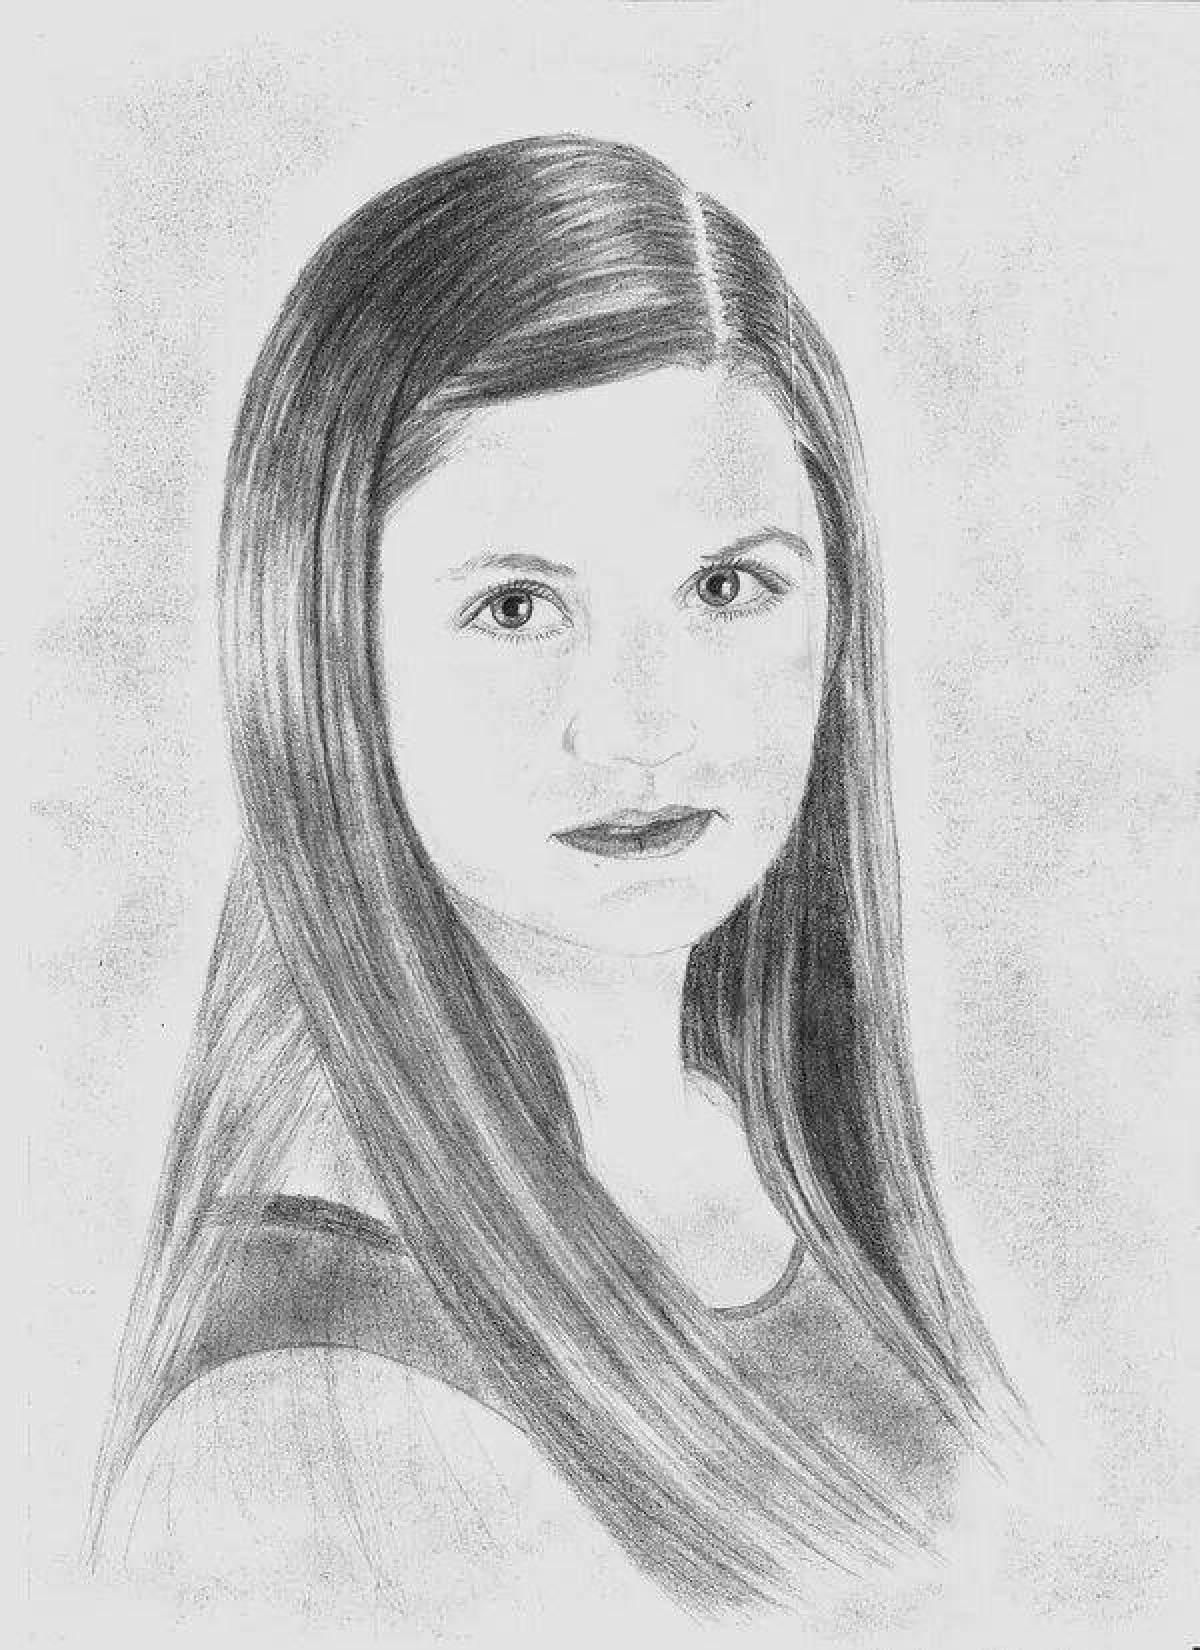 Ginny Weasley funny coloring book